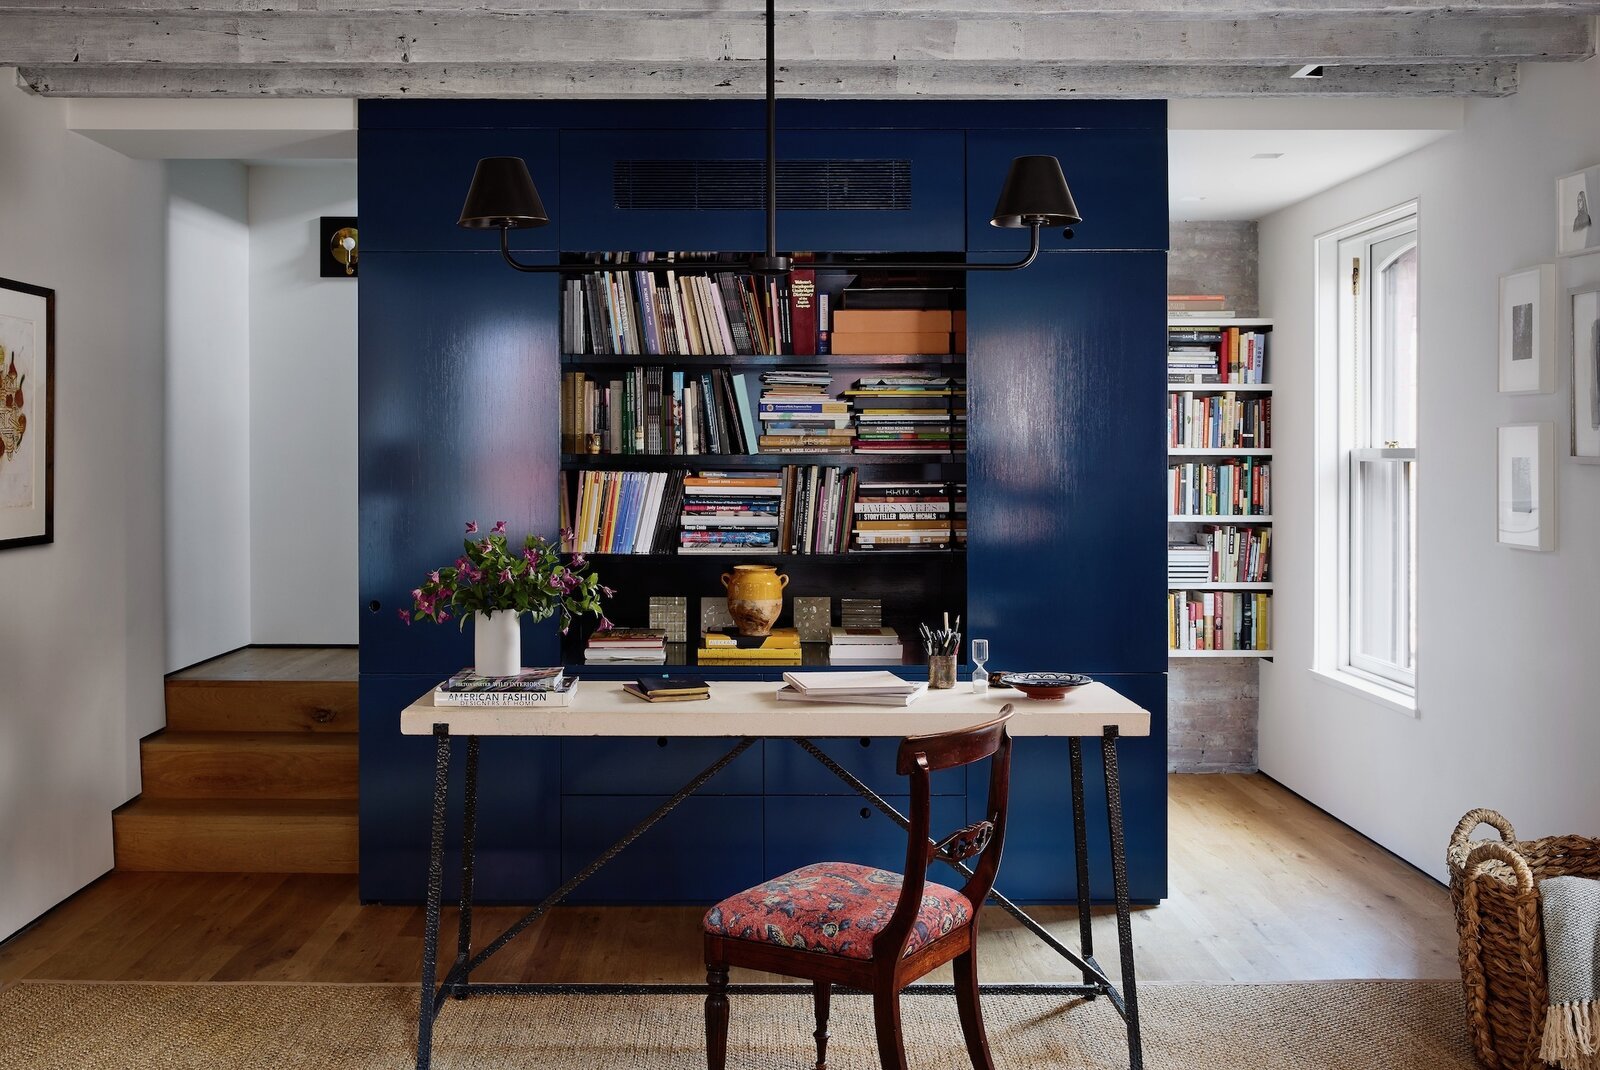  Priscilla and McBride initially discussed the office core being an actual desk that could be closed, but opted for this setup so she could sit with her back to the books and look out the window. The double arm chandelier from The Urban Electric Co. 